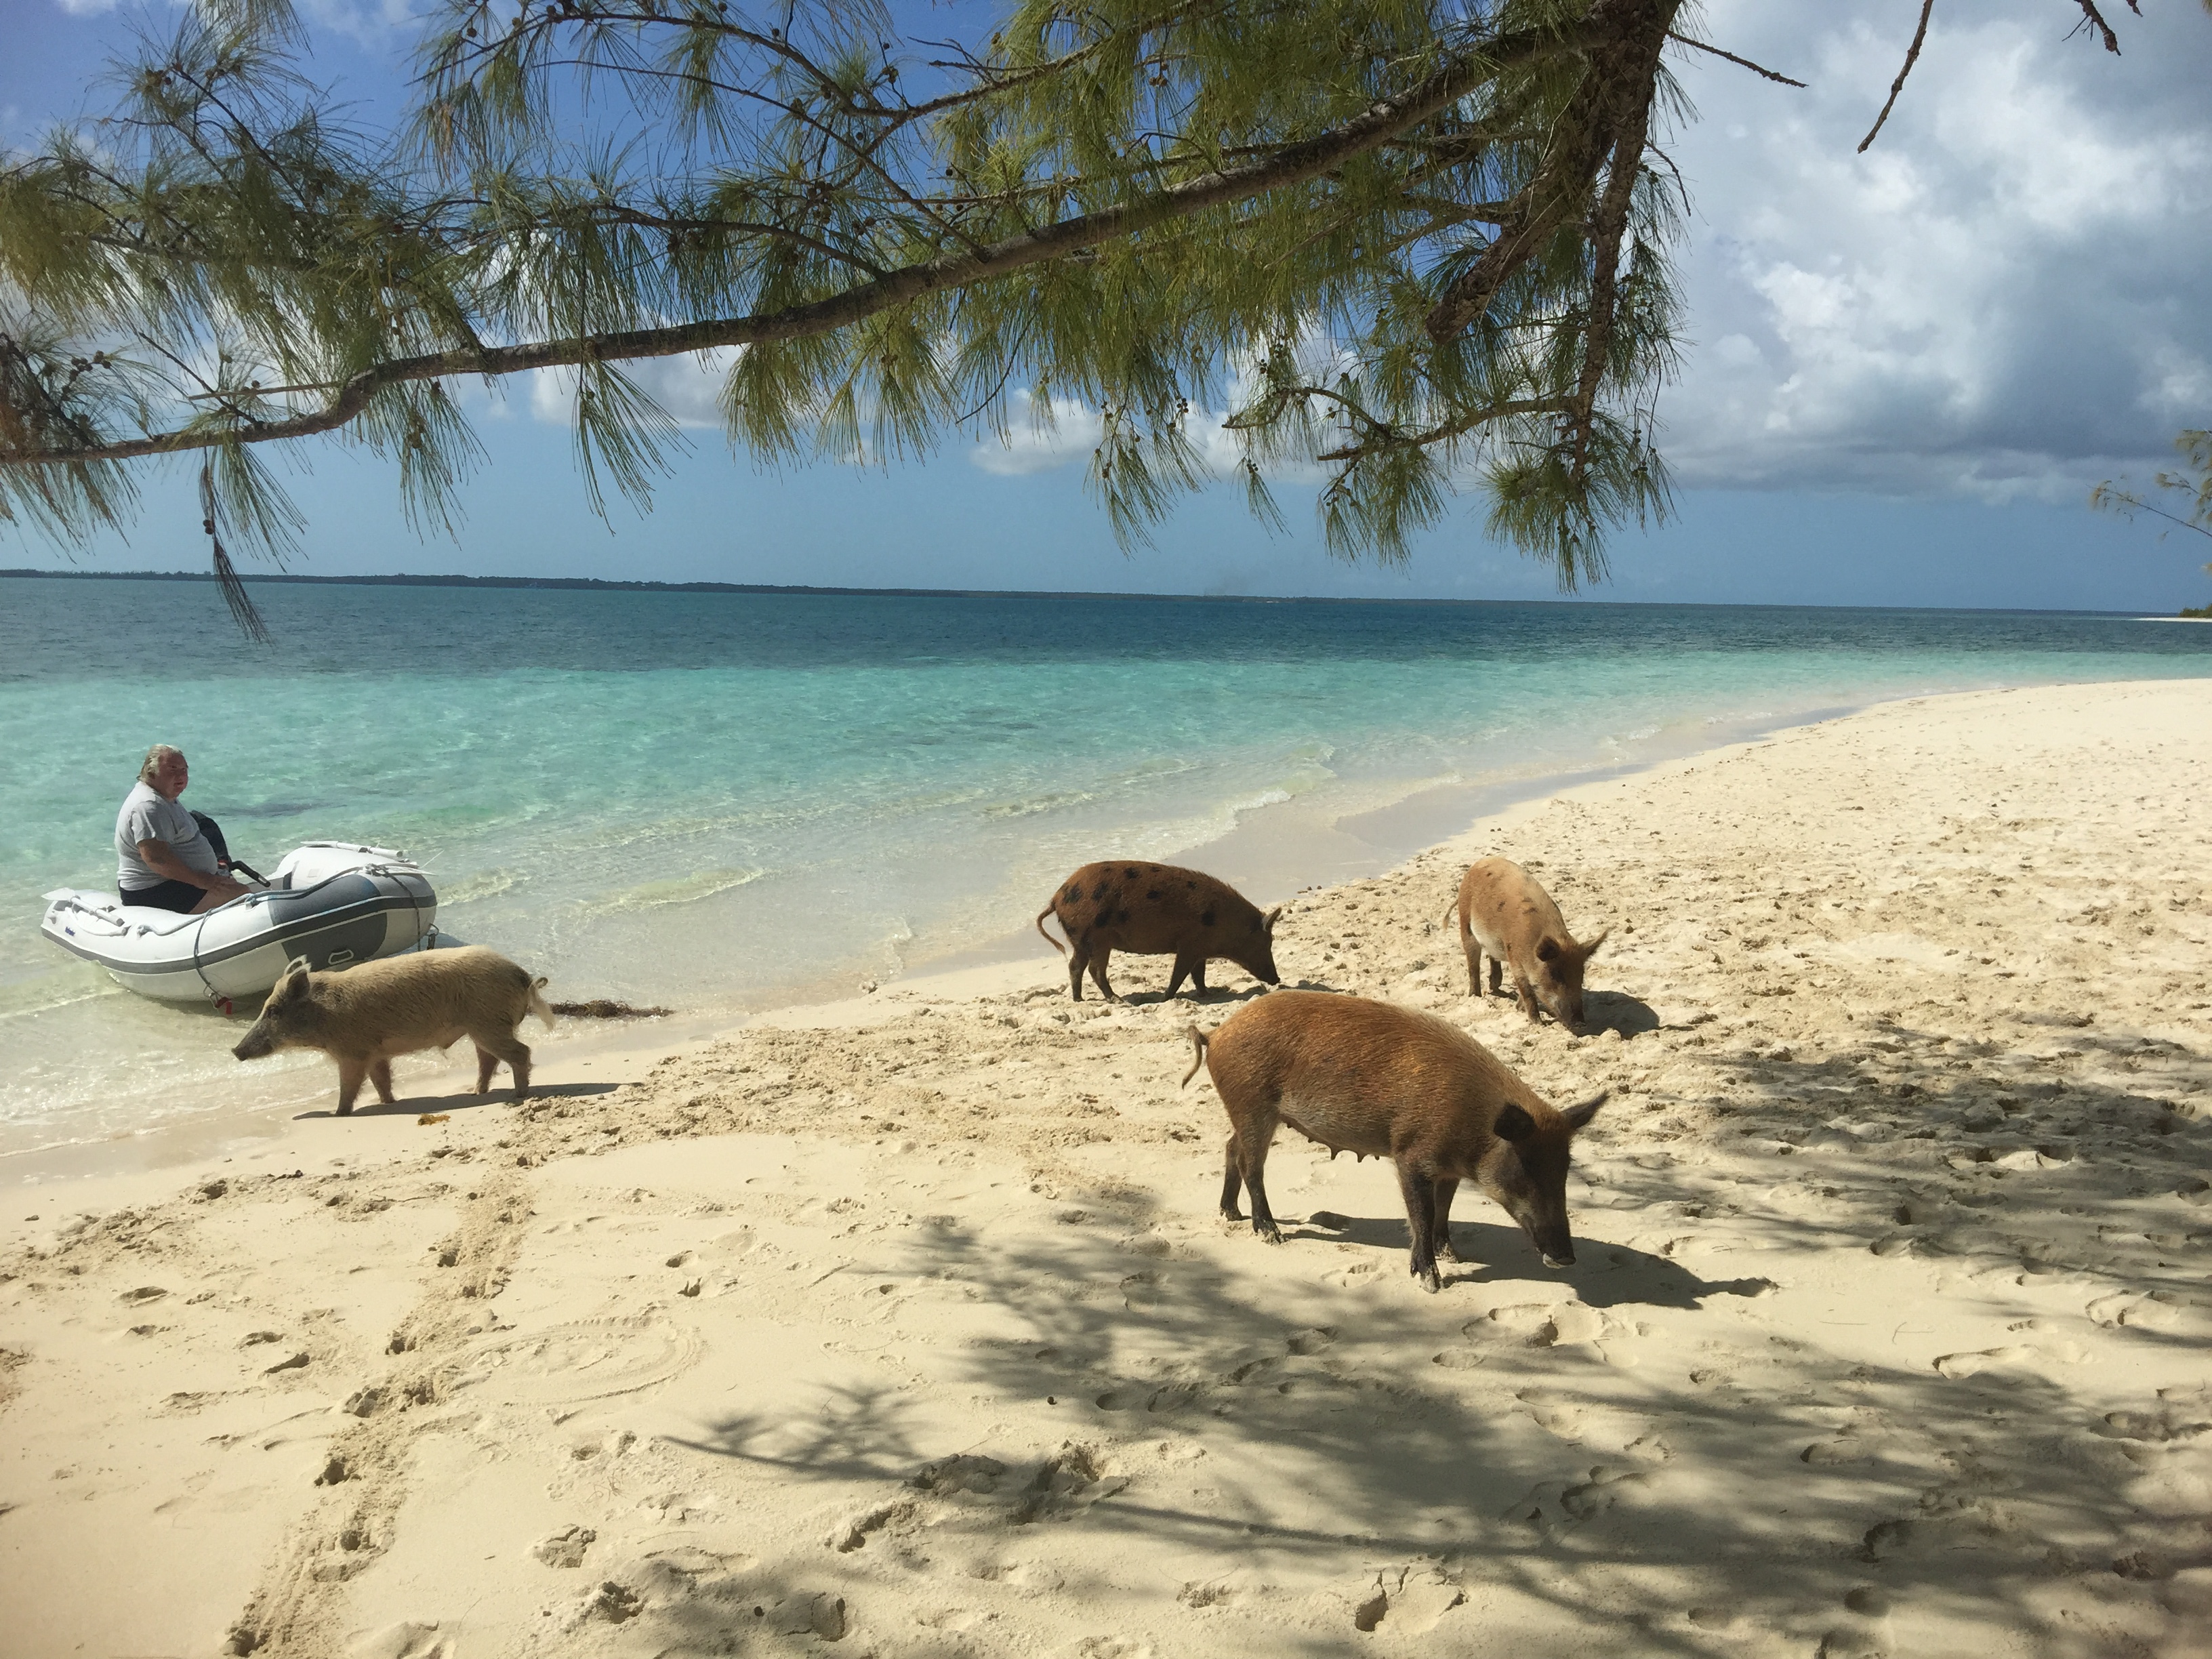 All these pigs turned their backs to me because I didn't have any food